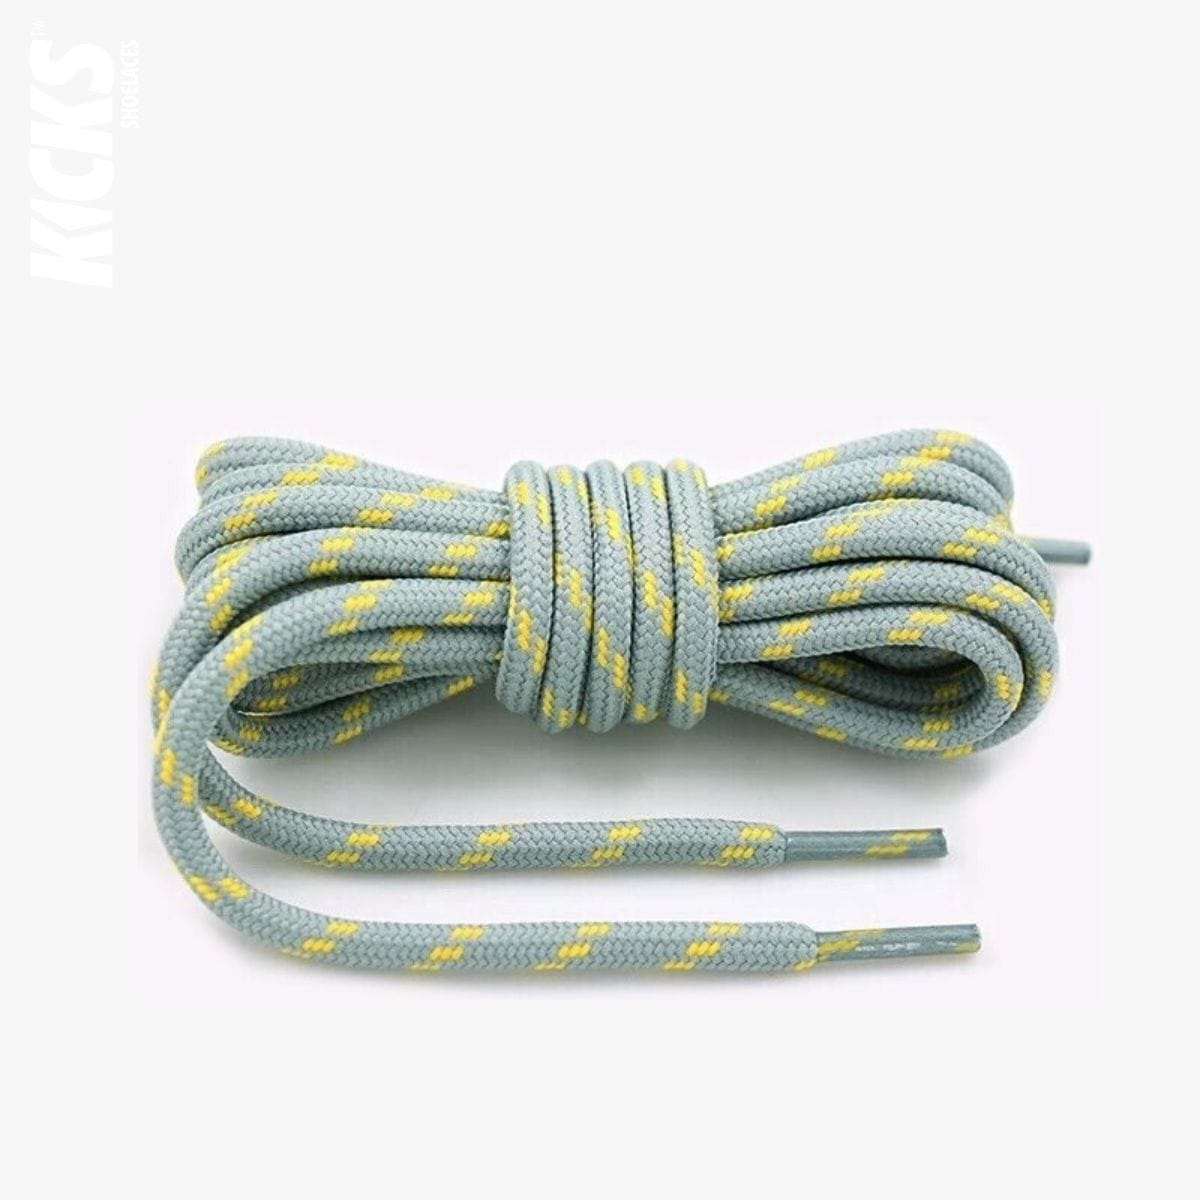 trekking-shoe-laces-united-states-in-light-grey-and-yellow-shop-online